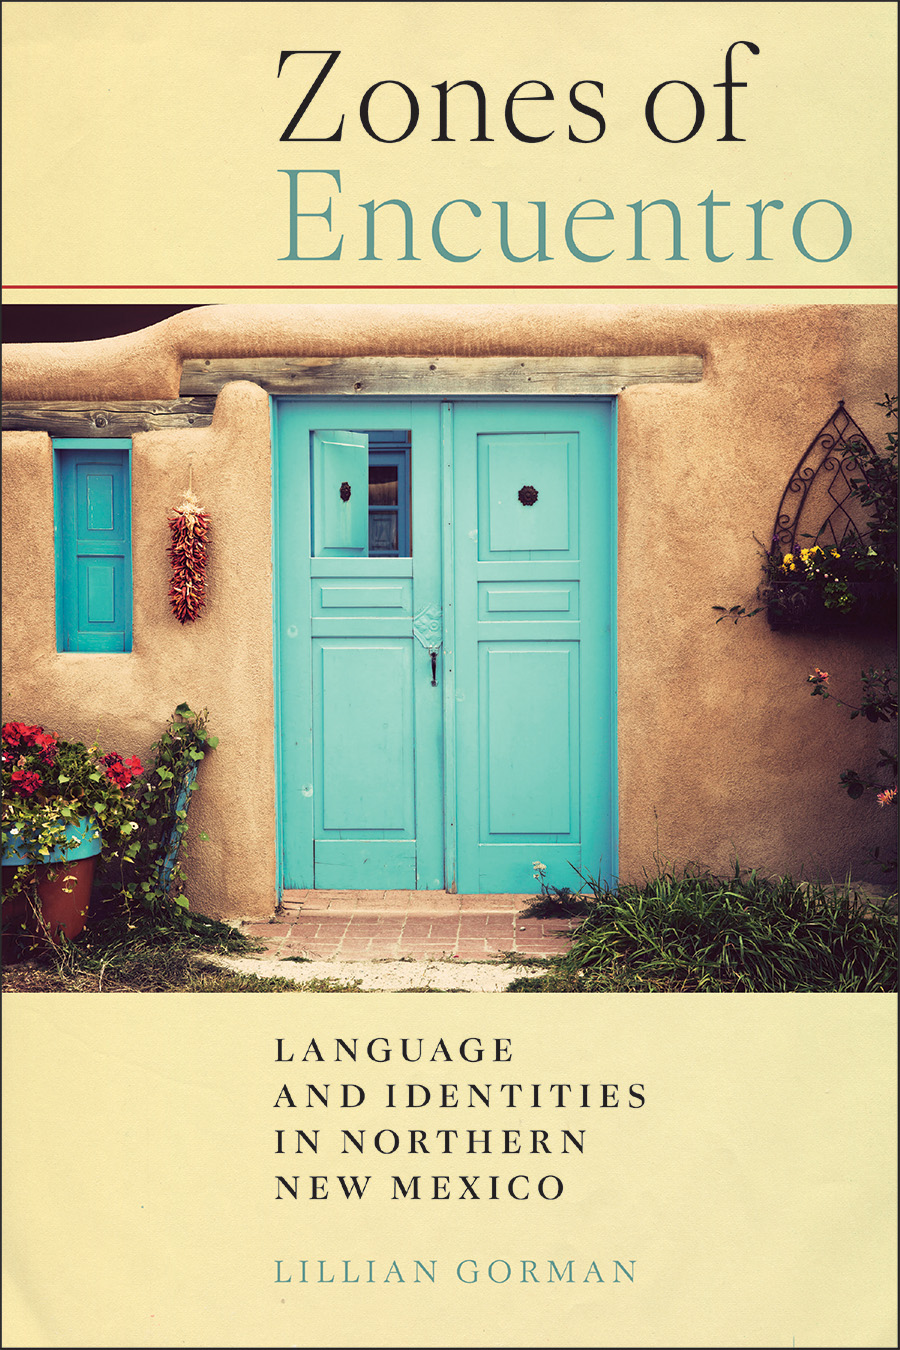 Front cover of Zones of Encuentro: Language and Identities in Northern New Mexico by Lillian Gorman, featuring a teal-colored New Mexican-style door set into an adobe brick wall. 